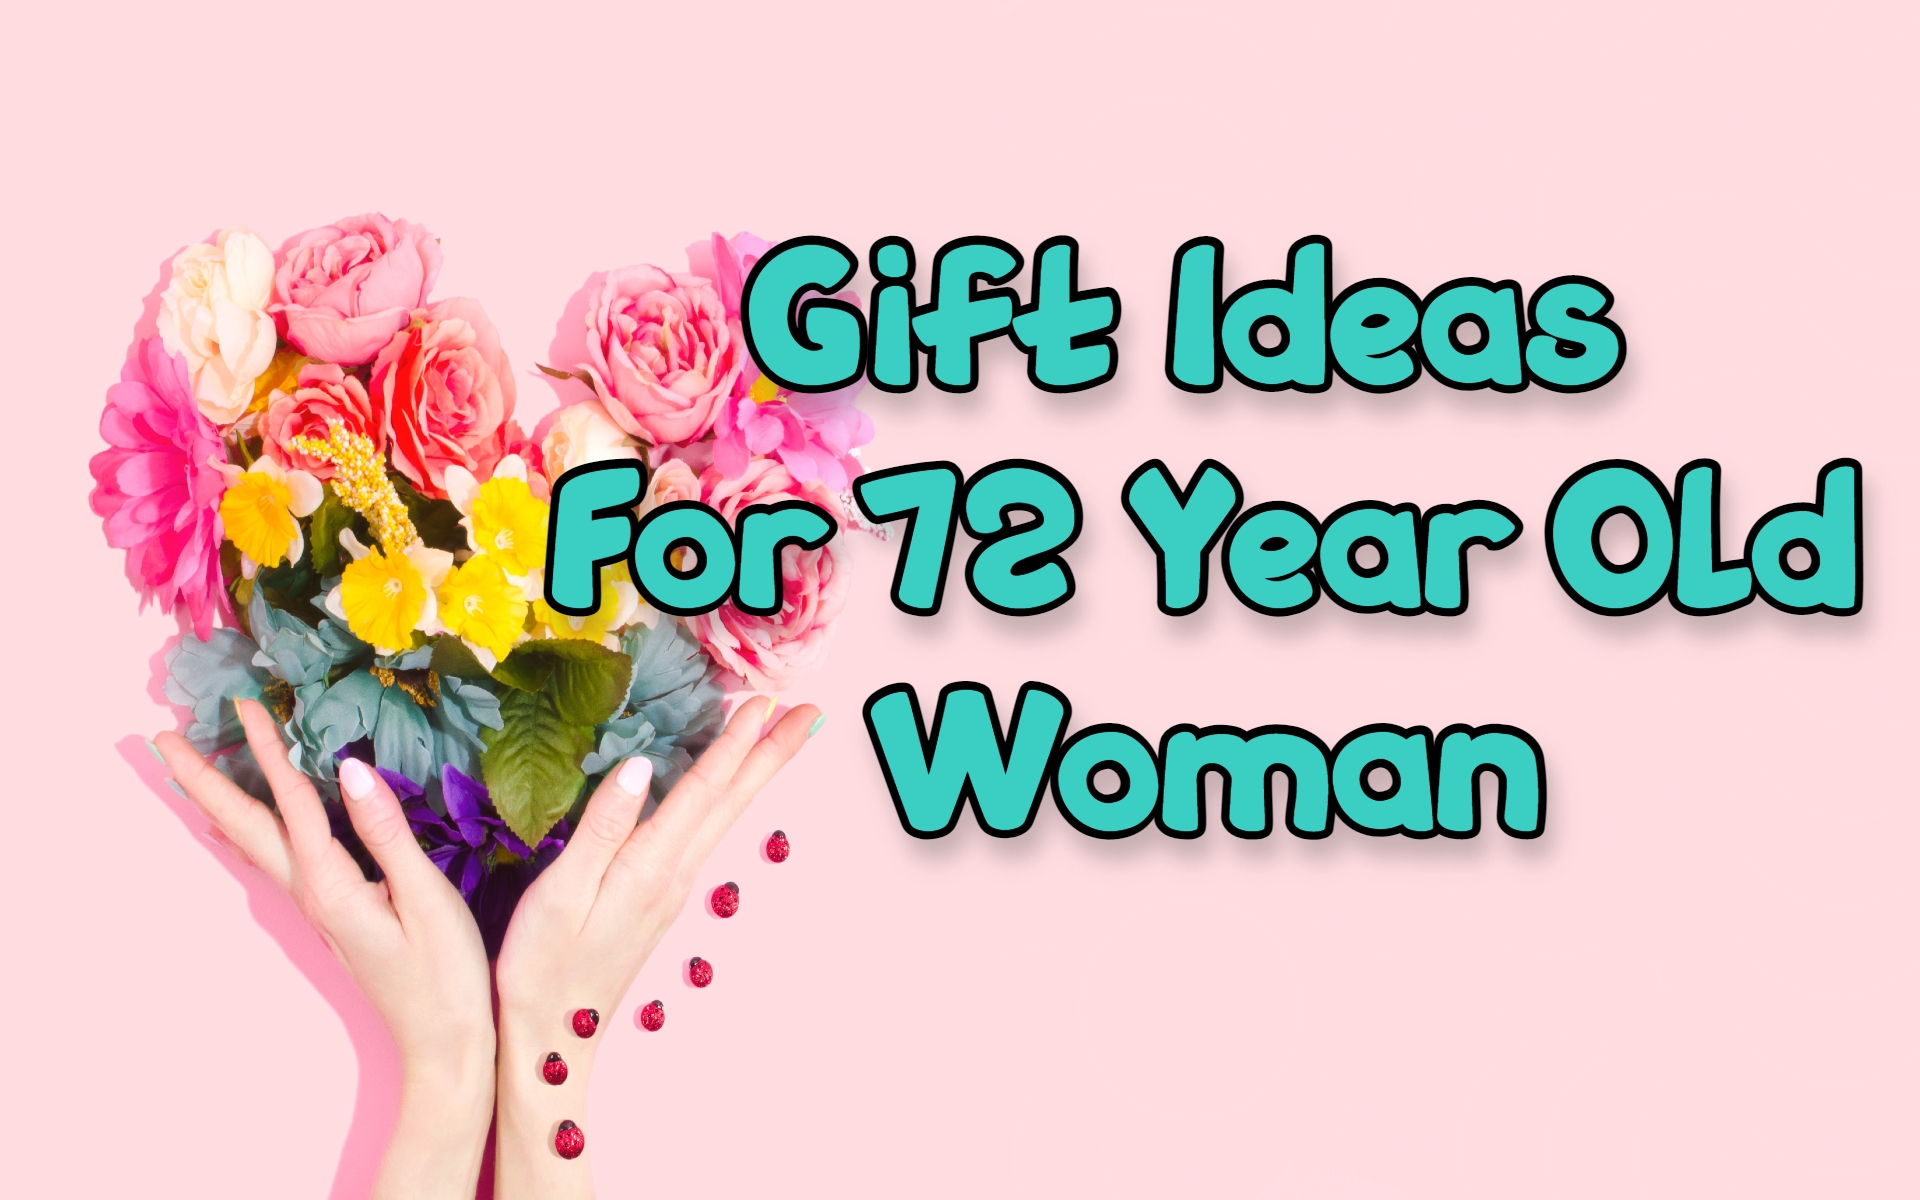 Cover image of gift ideas for 72-year-old woman by Giftsedge